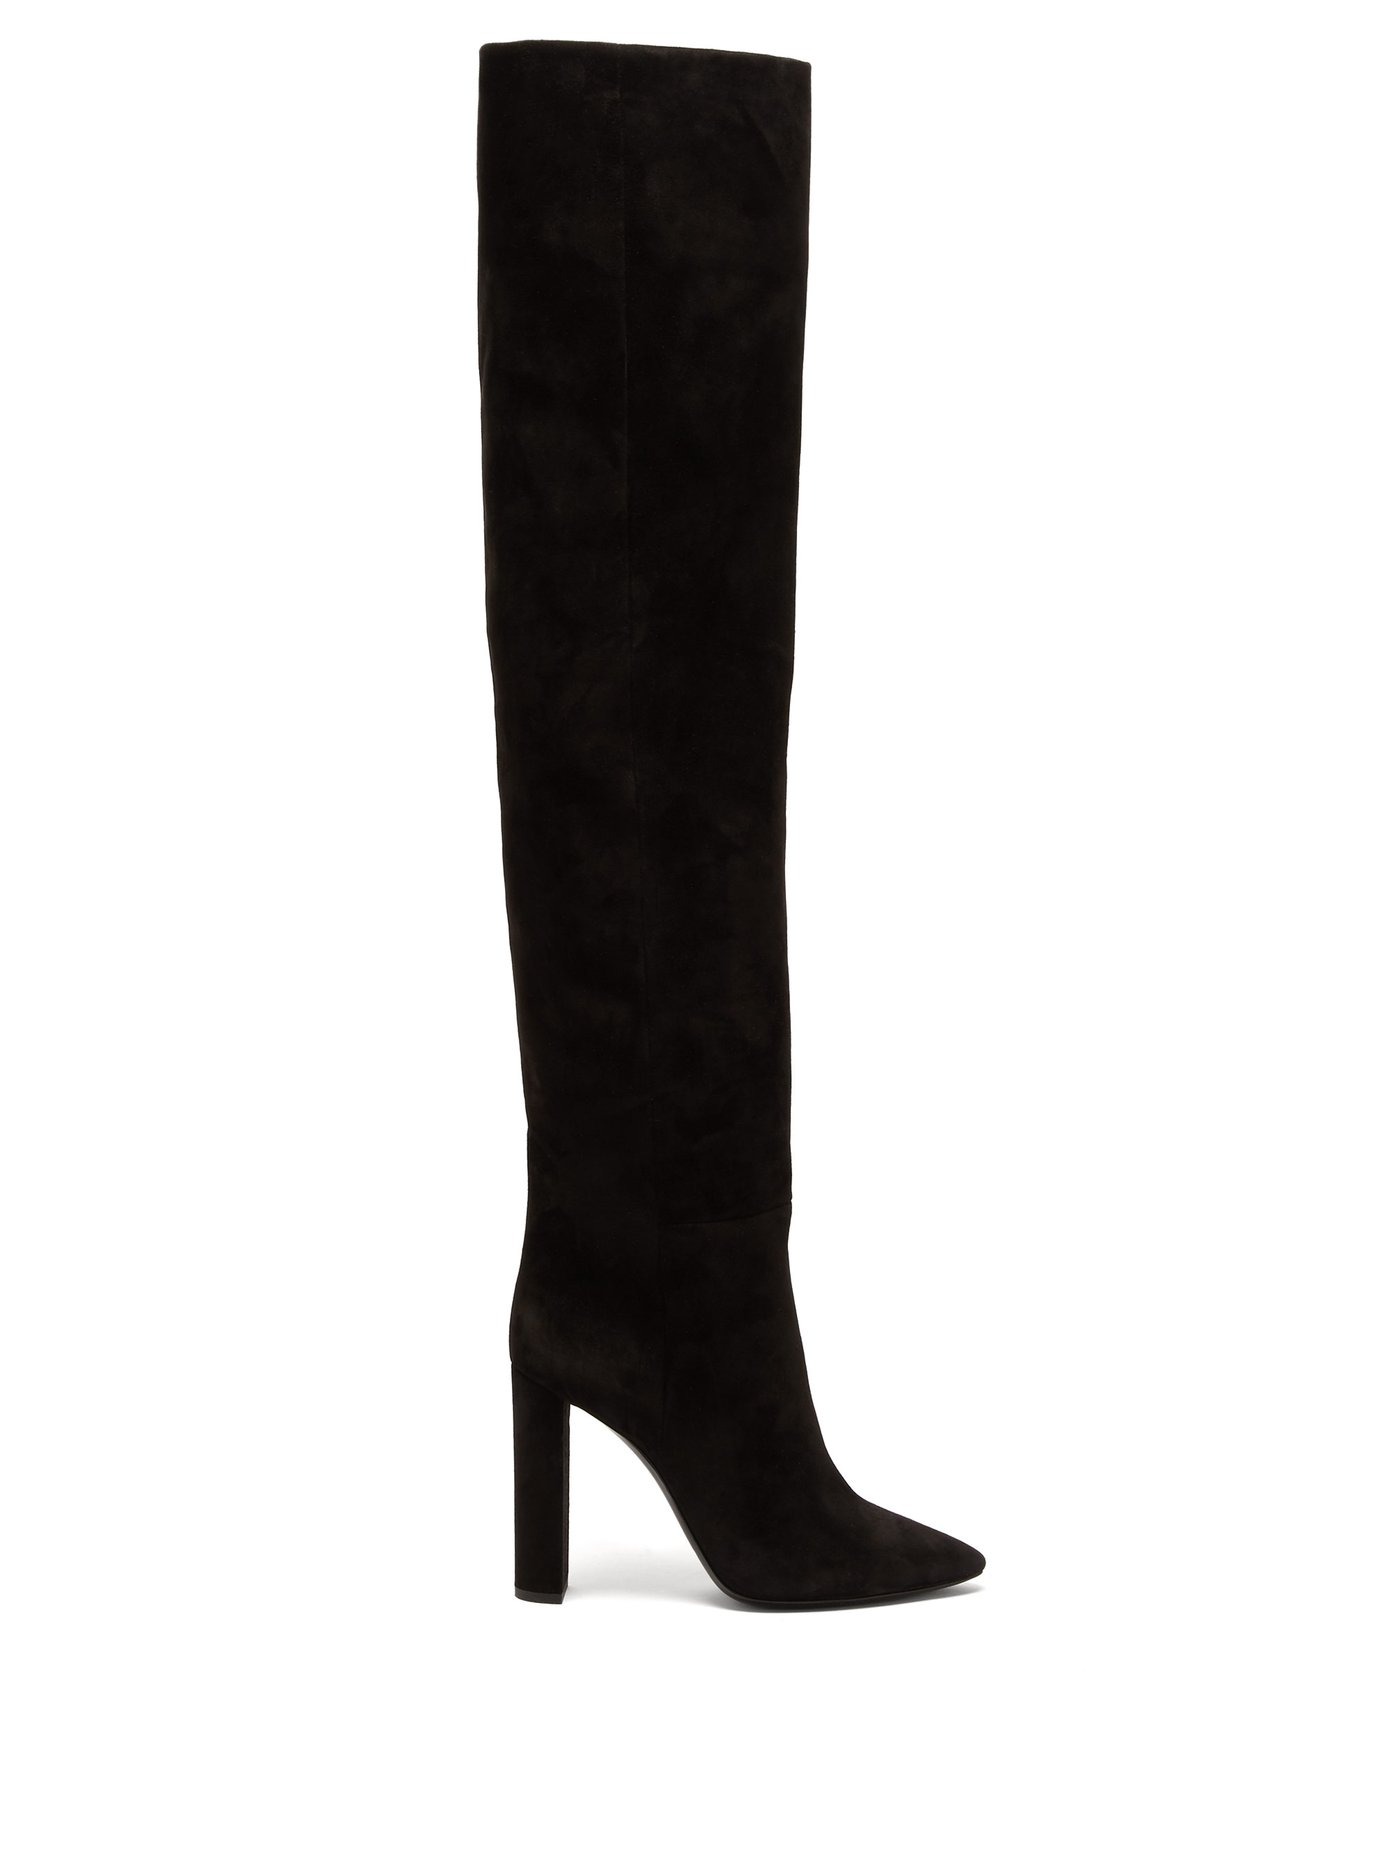 over the knee boots next day delivery